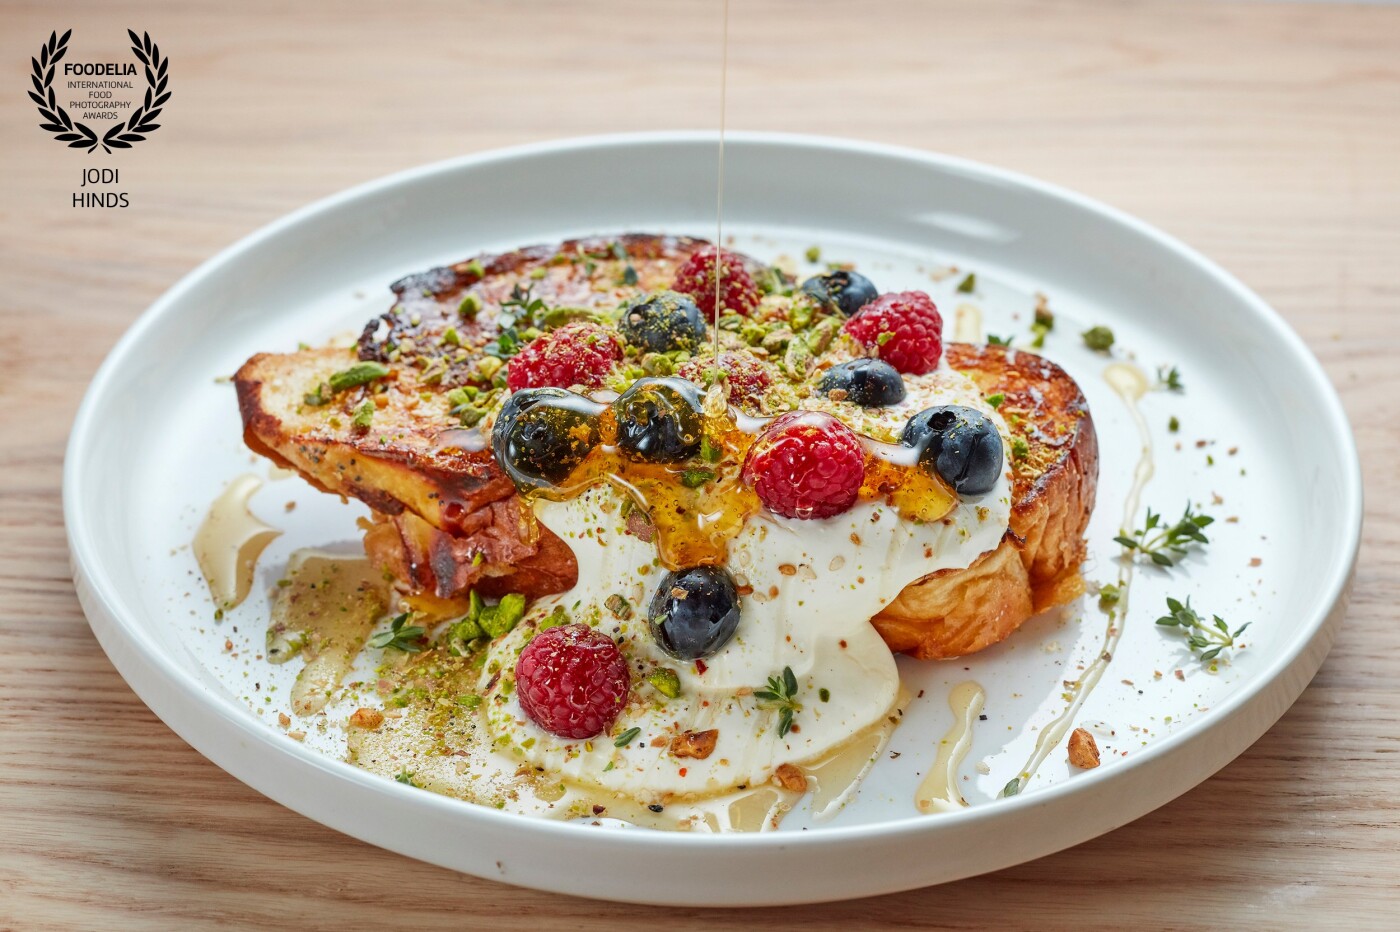 A beautiful new opening in Aldgate East, London is Amber - a stunning Mediterranean, Middle Eastern all day dining experience - from morning coffee culture to late night cocktails, it was such a lovely experience shooting with them.<br />
Breakfast doesn't get much better than this dish - Challah Toast  - Whipped mascarpone yogurt, seasonal fruit, honey, thyme, seeds, pistachios on brioche bread<br />
Deliciousness defined....<br />
Chef: Murat Kilic @murroviajero<br />
Designer: Solveig Castell<br />
Restaurant: @amber.ldn<br />
Photographer: @jodihindsphoto